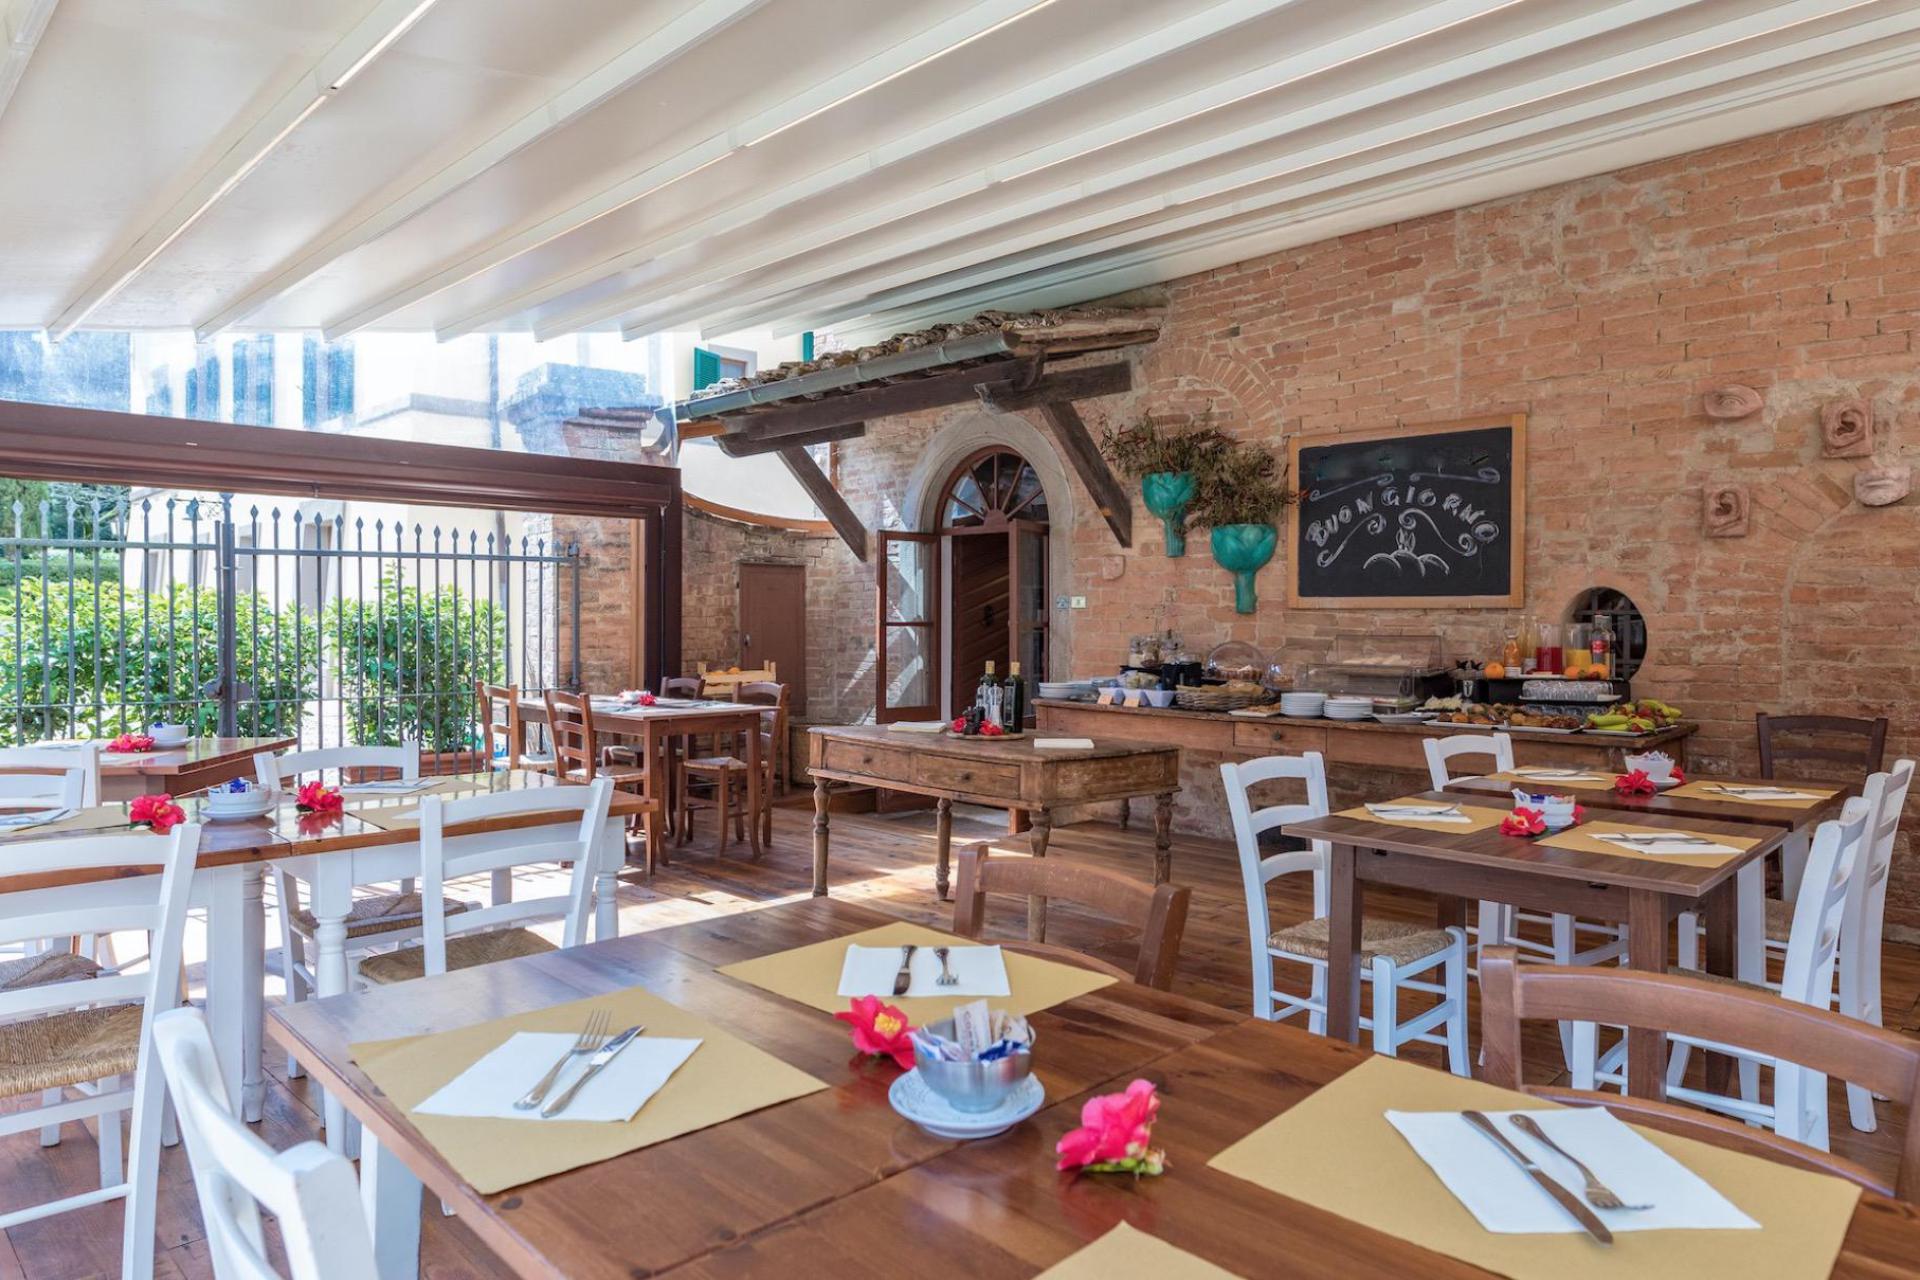 3. Agriturismo with small trattoria